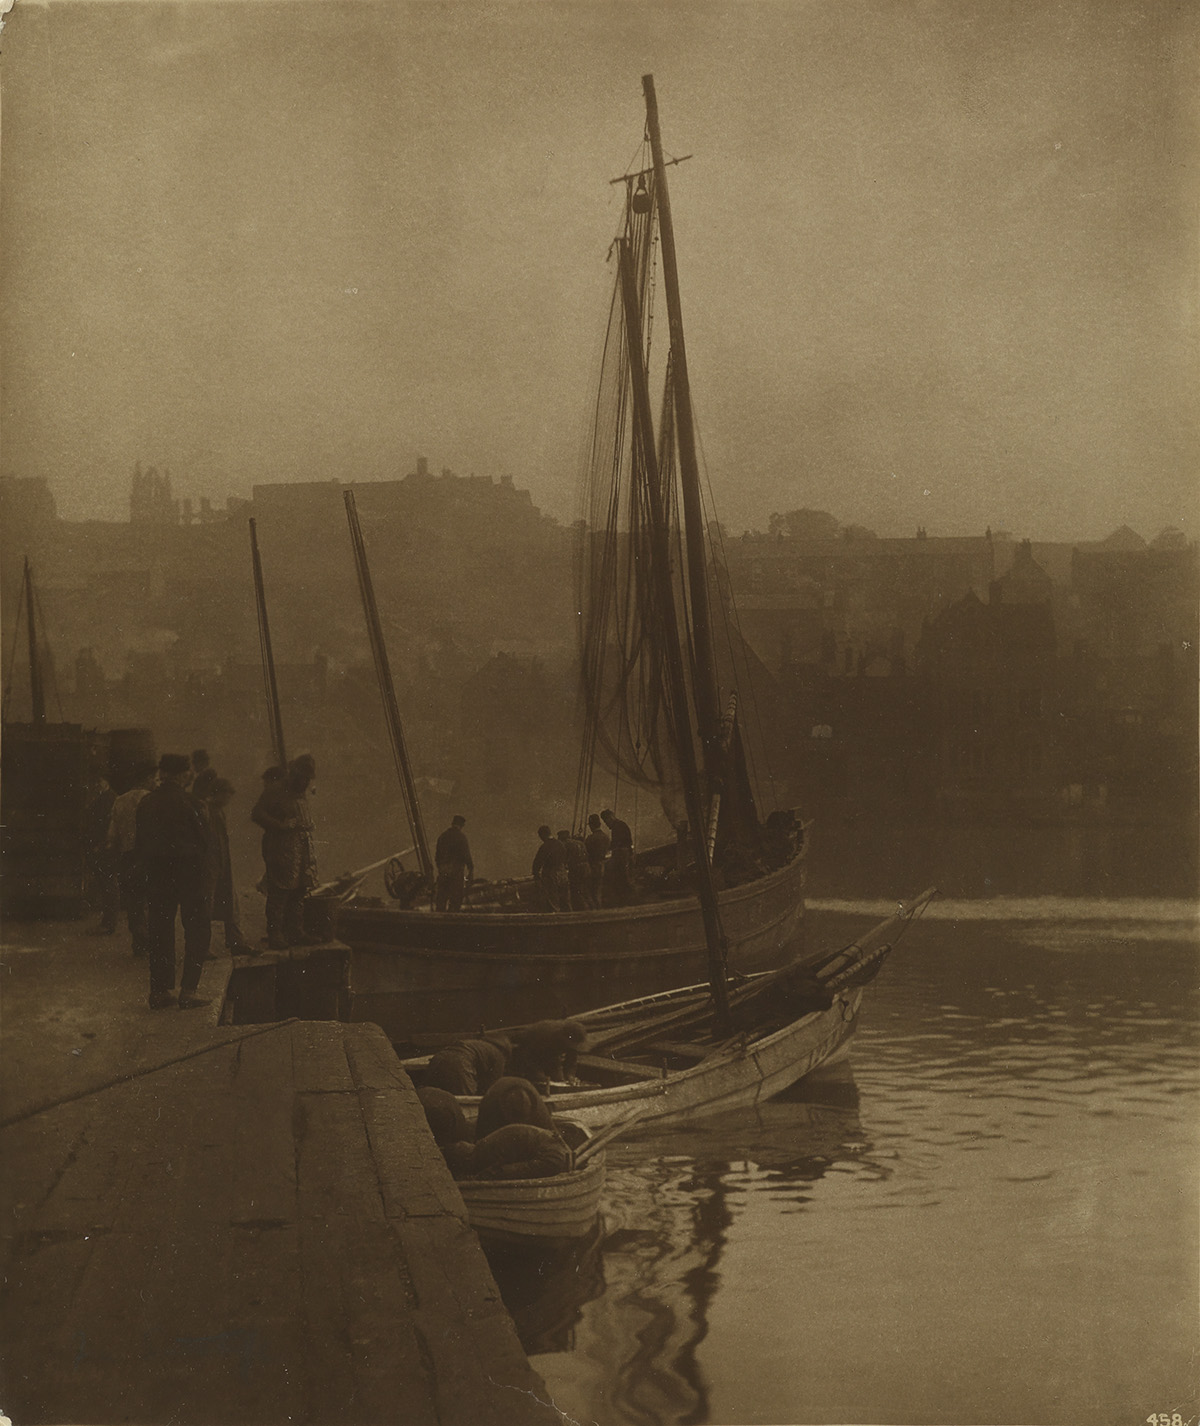 FRANK MEADOW SUTCLIFFE (1853-1941) Fishing boat, Whitby, England * Young fisherwoman, Whitby, England.